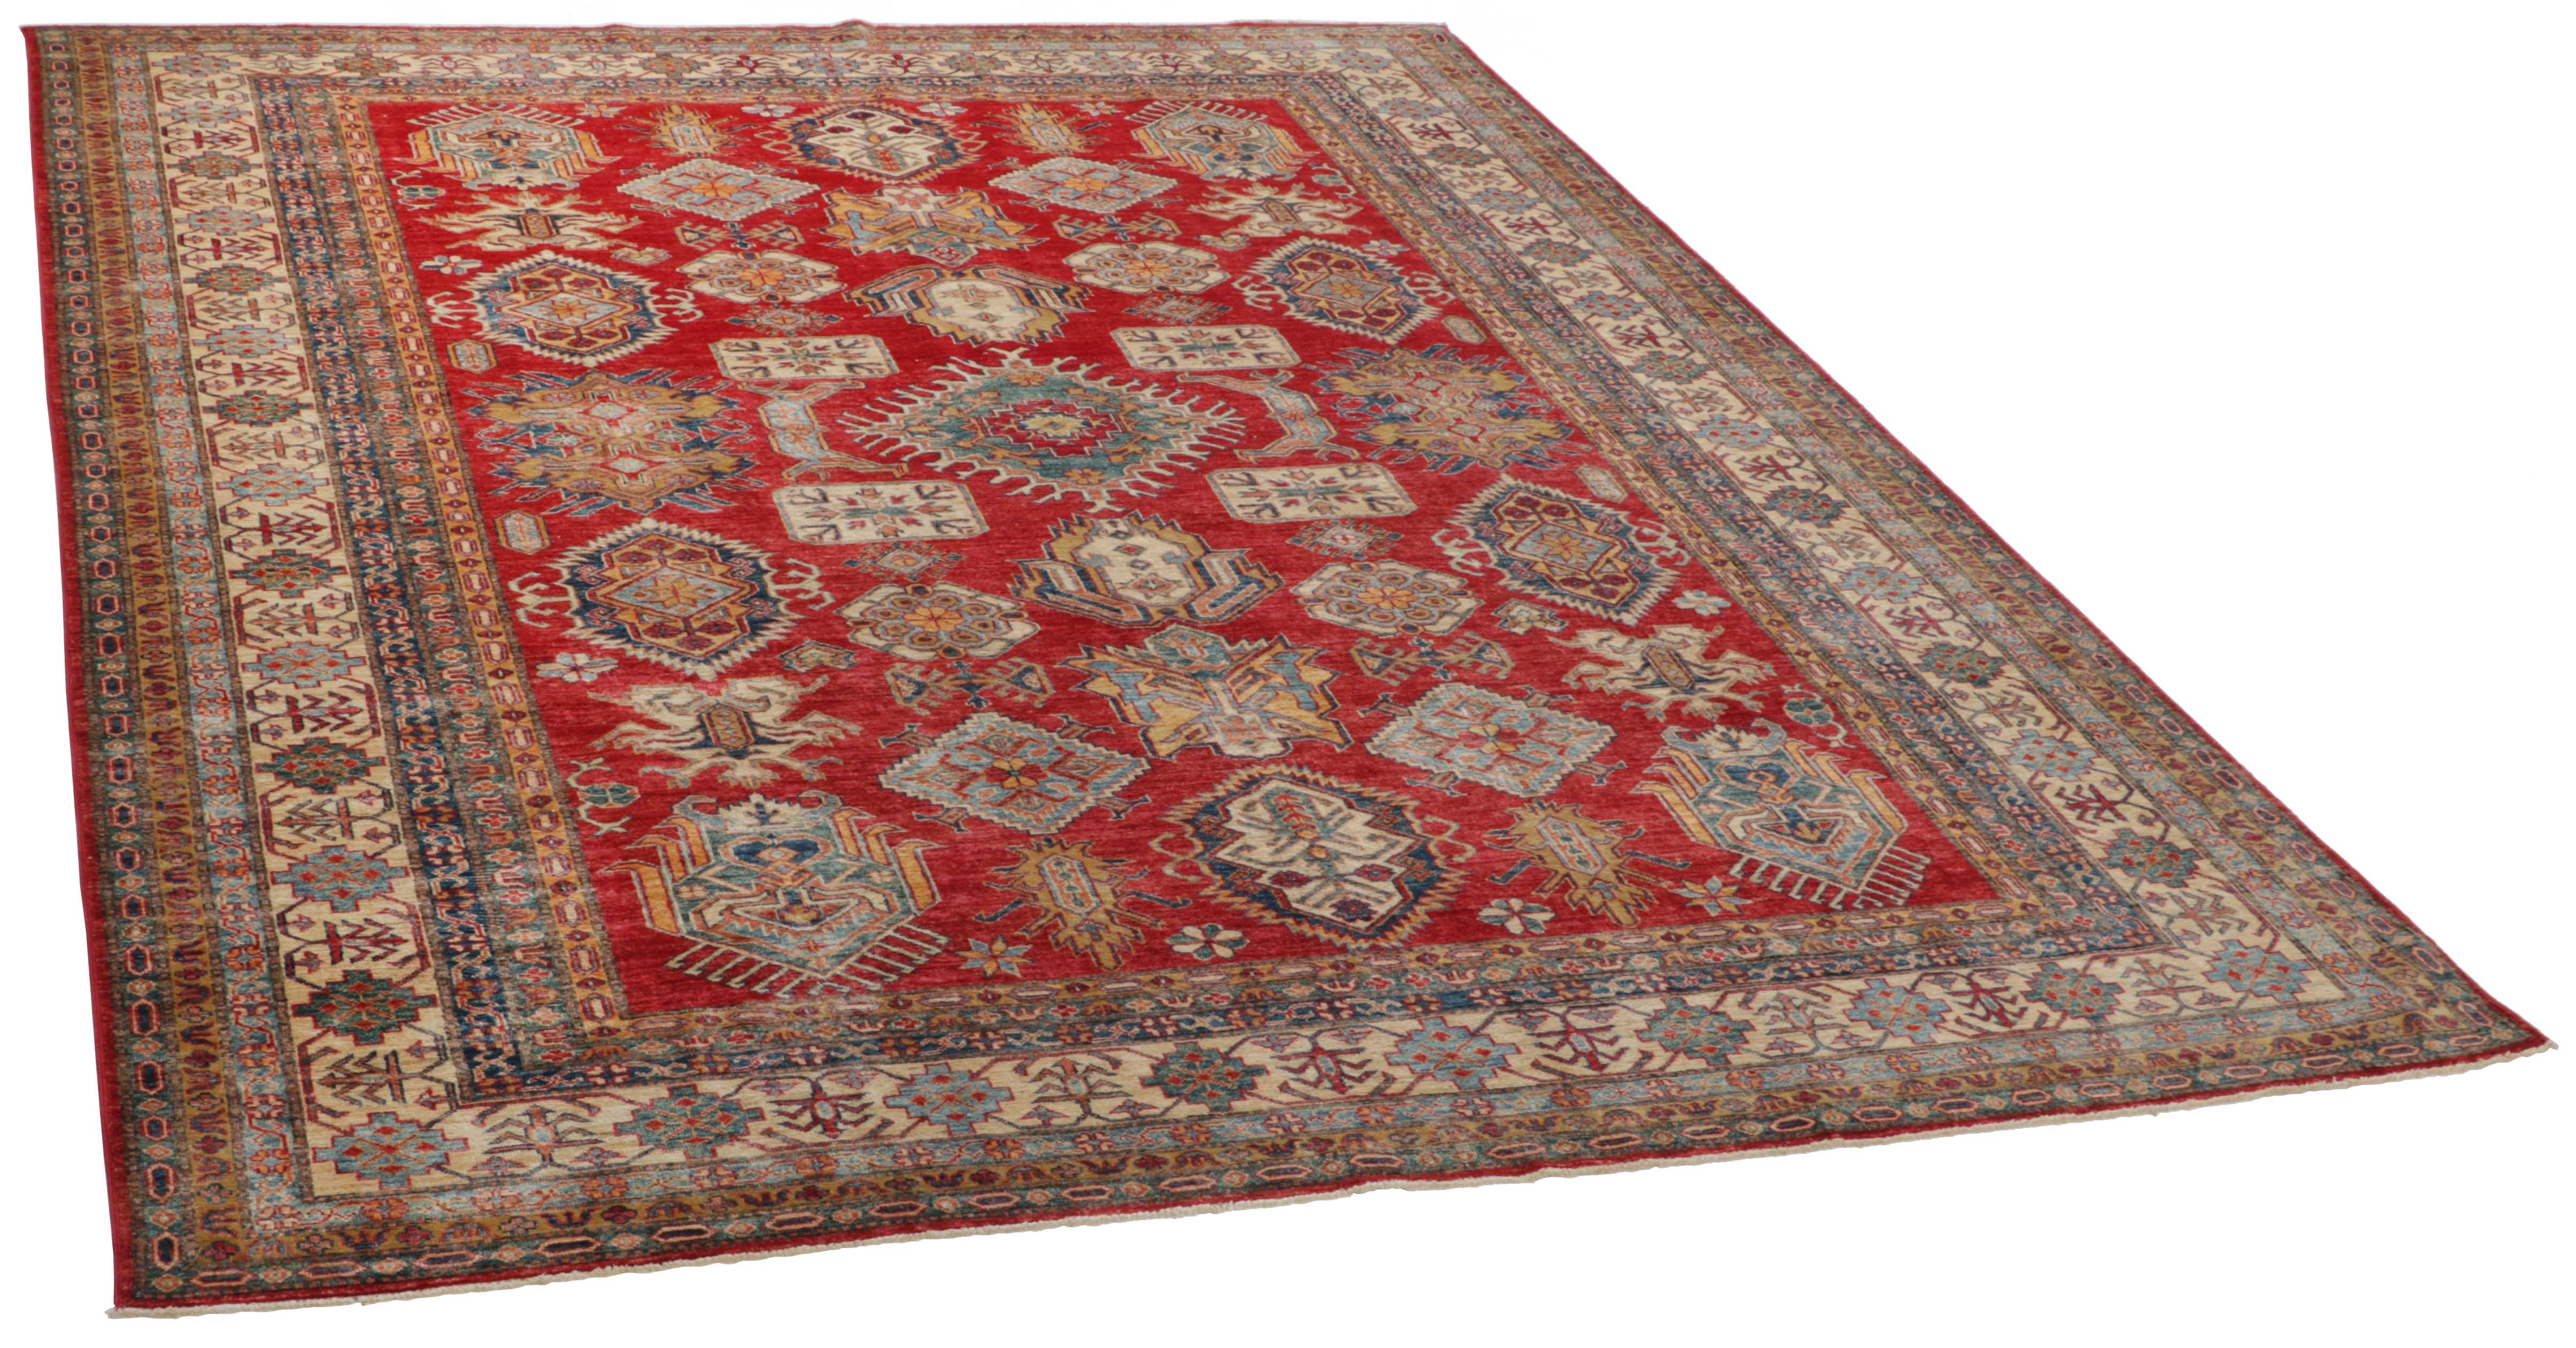 Authentic oriental rug with red and beige traditional geometric design